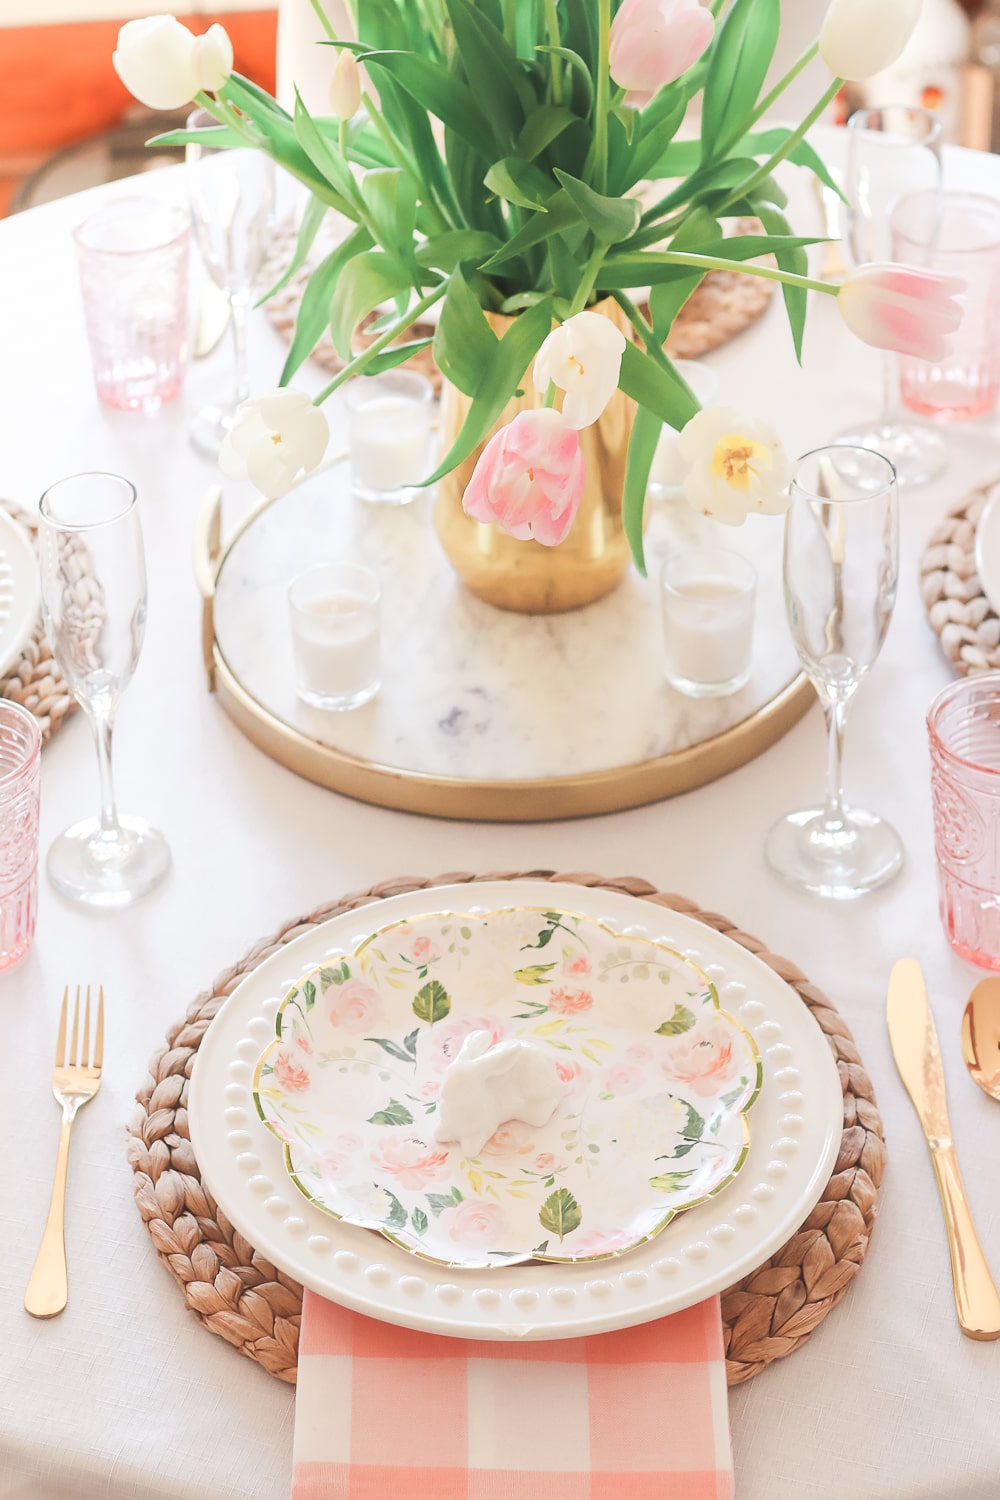 Southern lifestyle blogger Stephanie Ziajka shares her favorite Easter table decorations on Diary of a Debutante